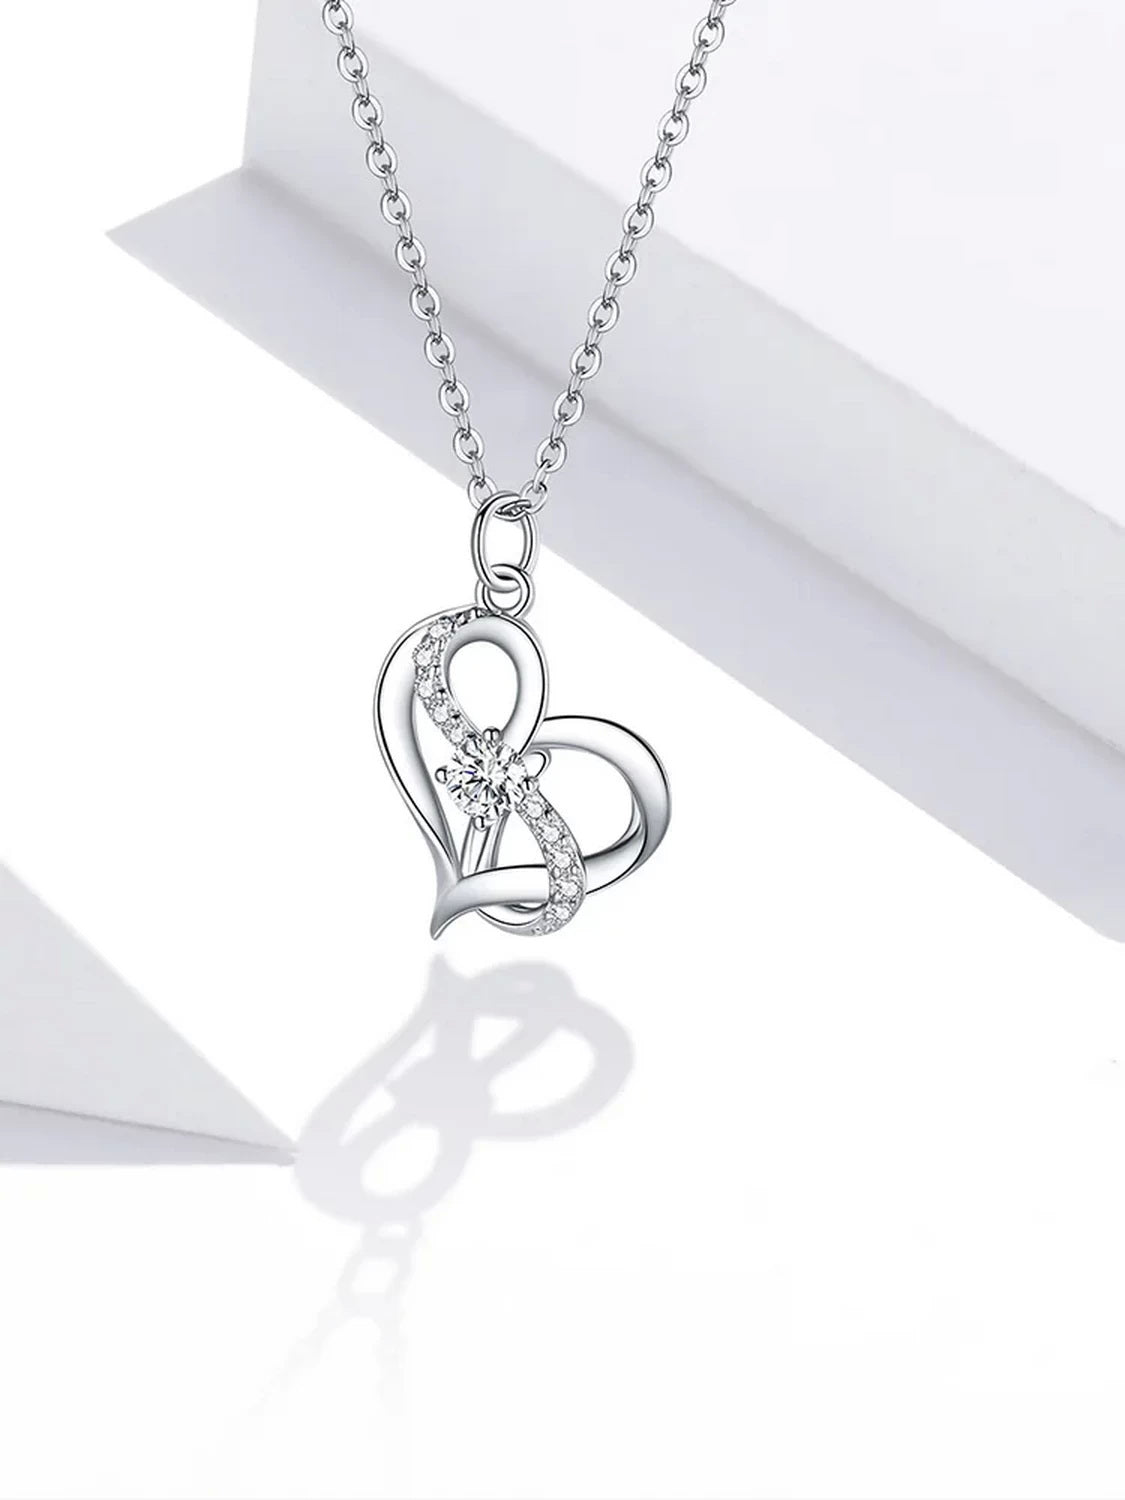 PAHALA 925 Strling Silver Clear CZ Forever Love Heart Pendant Necklace